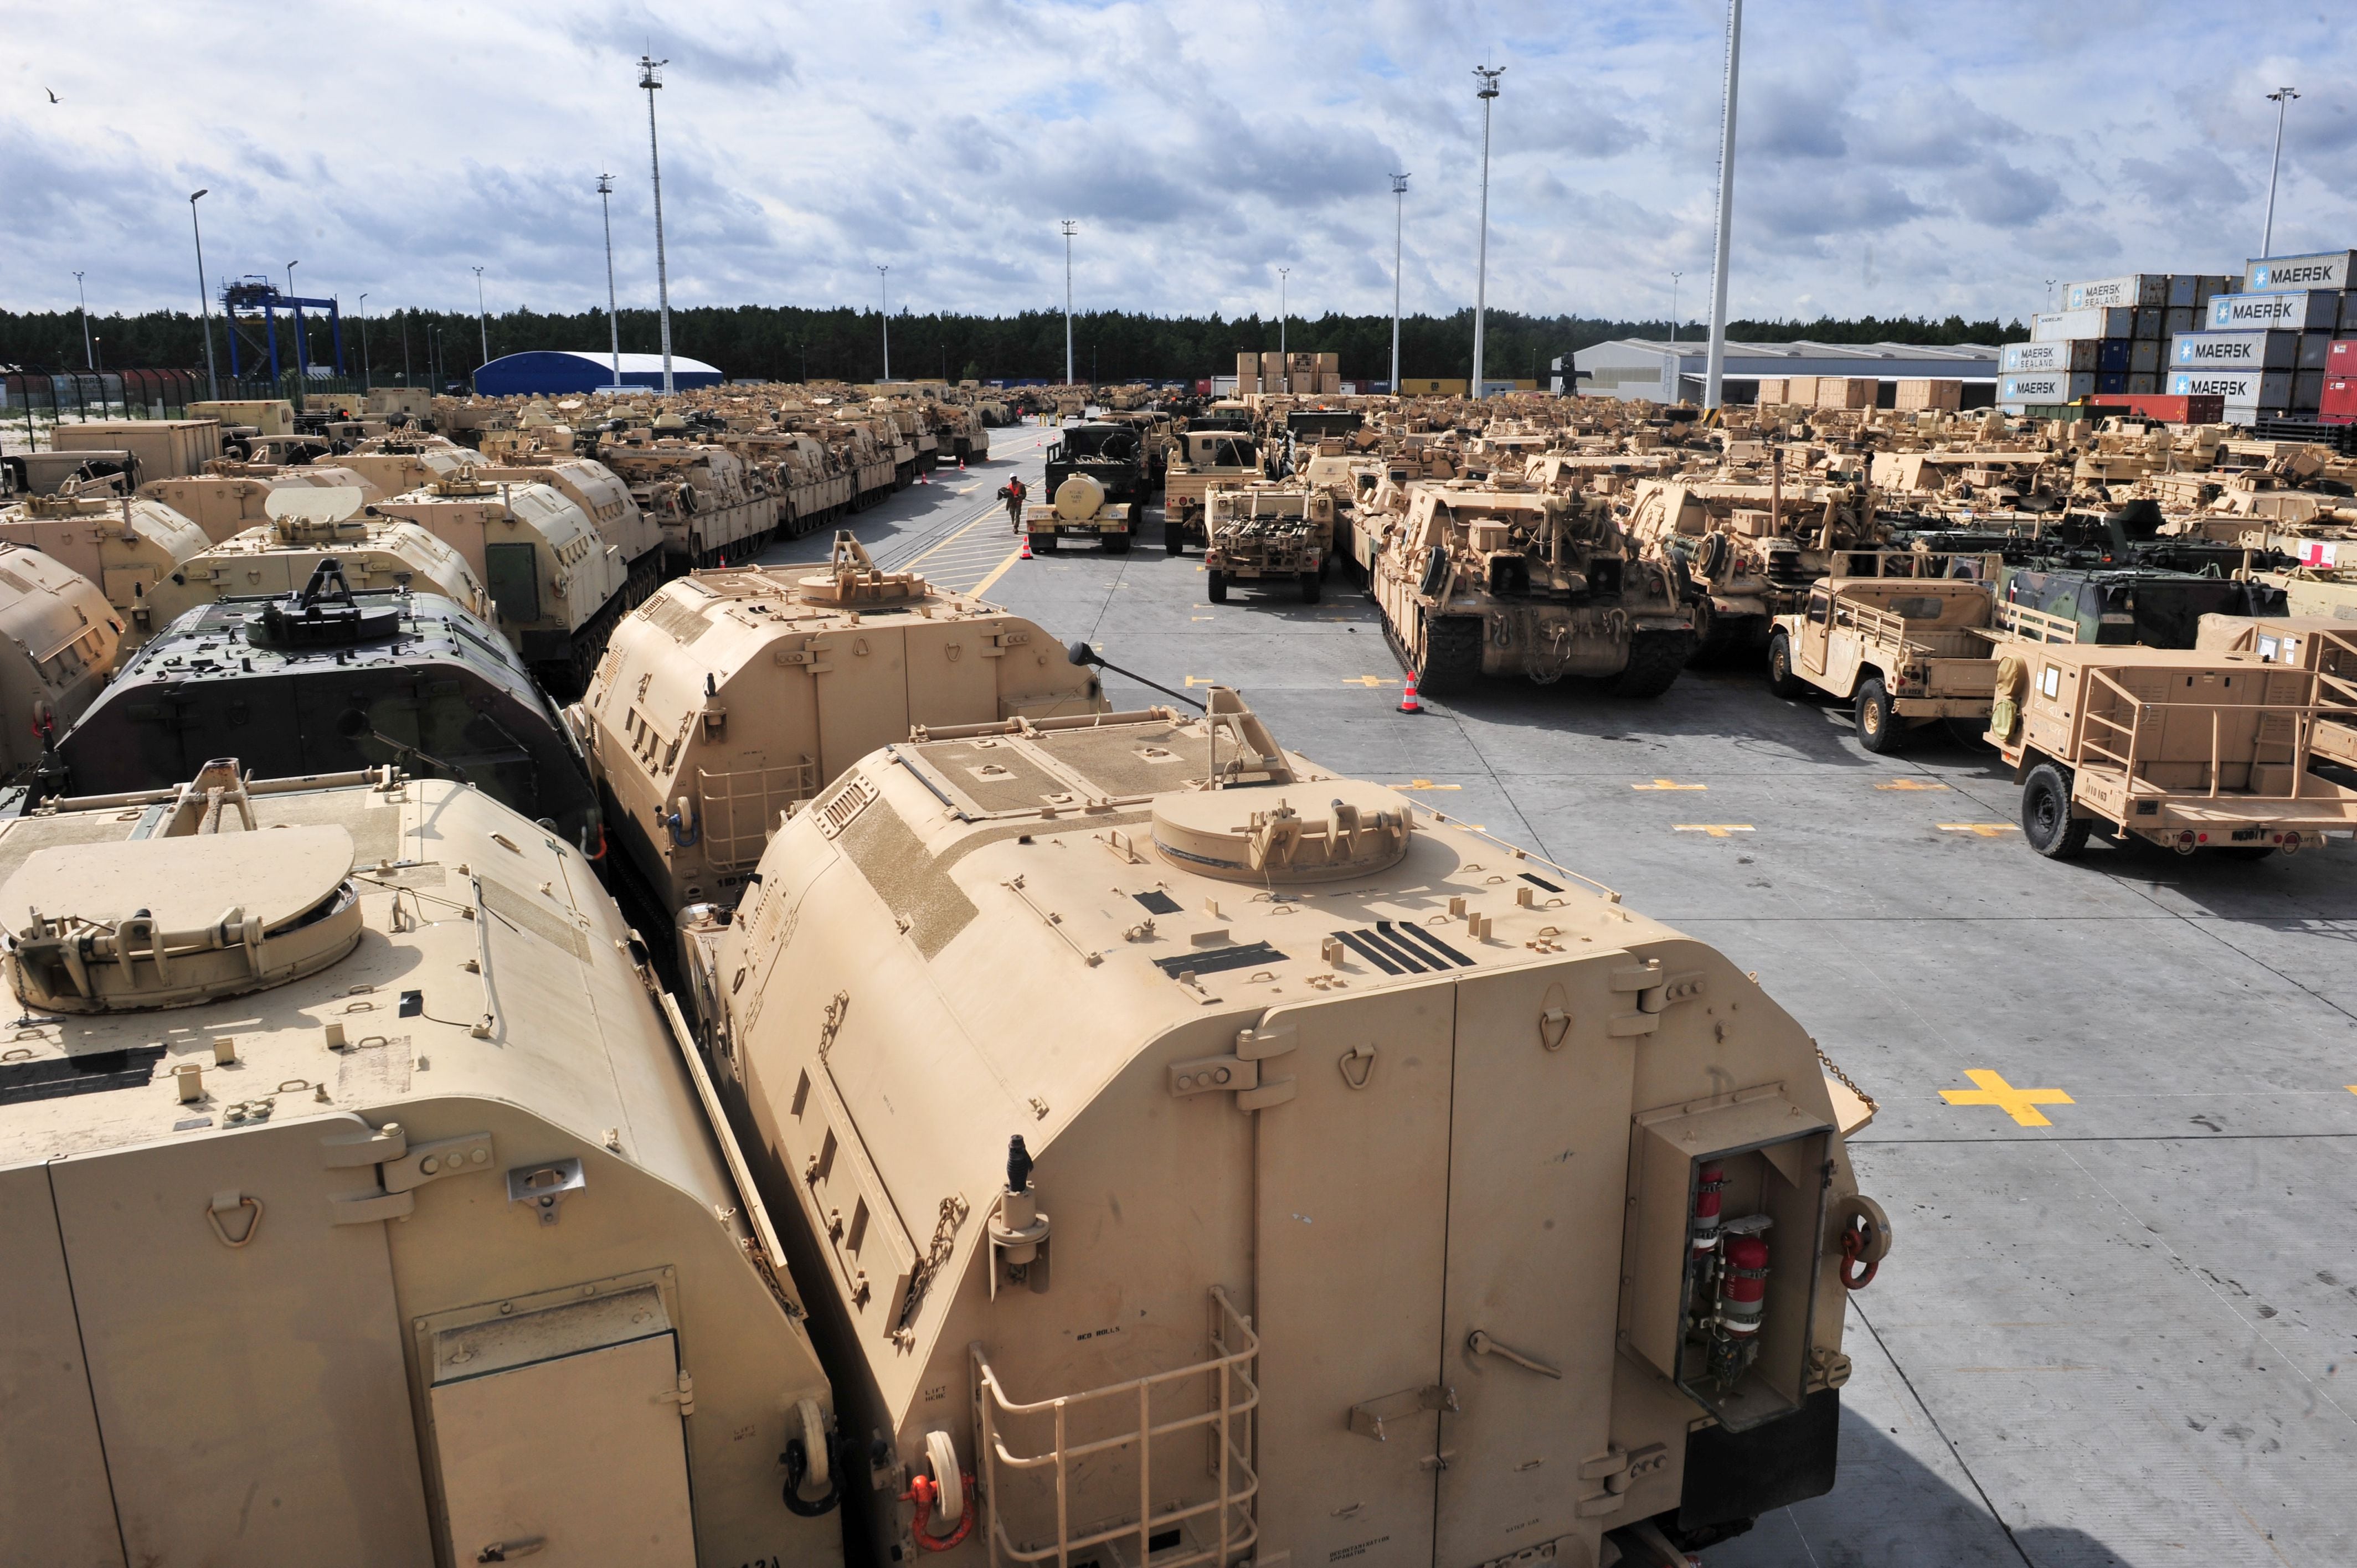 More than 1,000 pieces of eqiuipment, including M1 Abrams tanks, Paladin self-propelled howitzers, wheeled vehicles and other equipment from 2nd Armored Brigade Combat Team, 1st Infantry Division, out of Fort Riley, Kansas, lines the port in Gdansk, Poland, Sept. 14, 2017, as the unit prepares to move its equipment inland. (Sgt. 1st Class Jacob A. McDonald/Army)